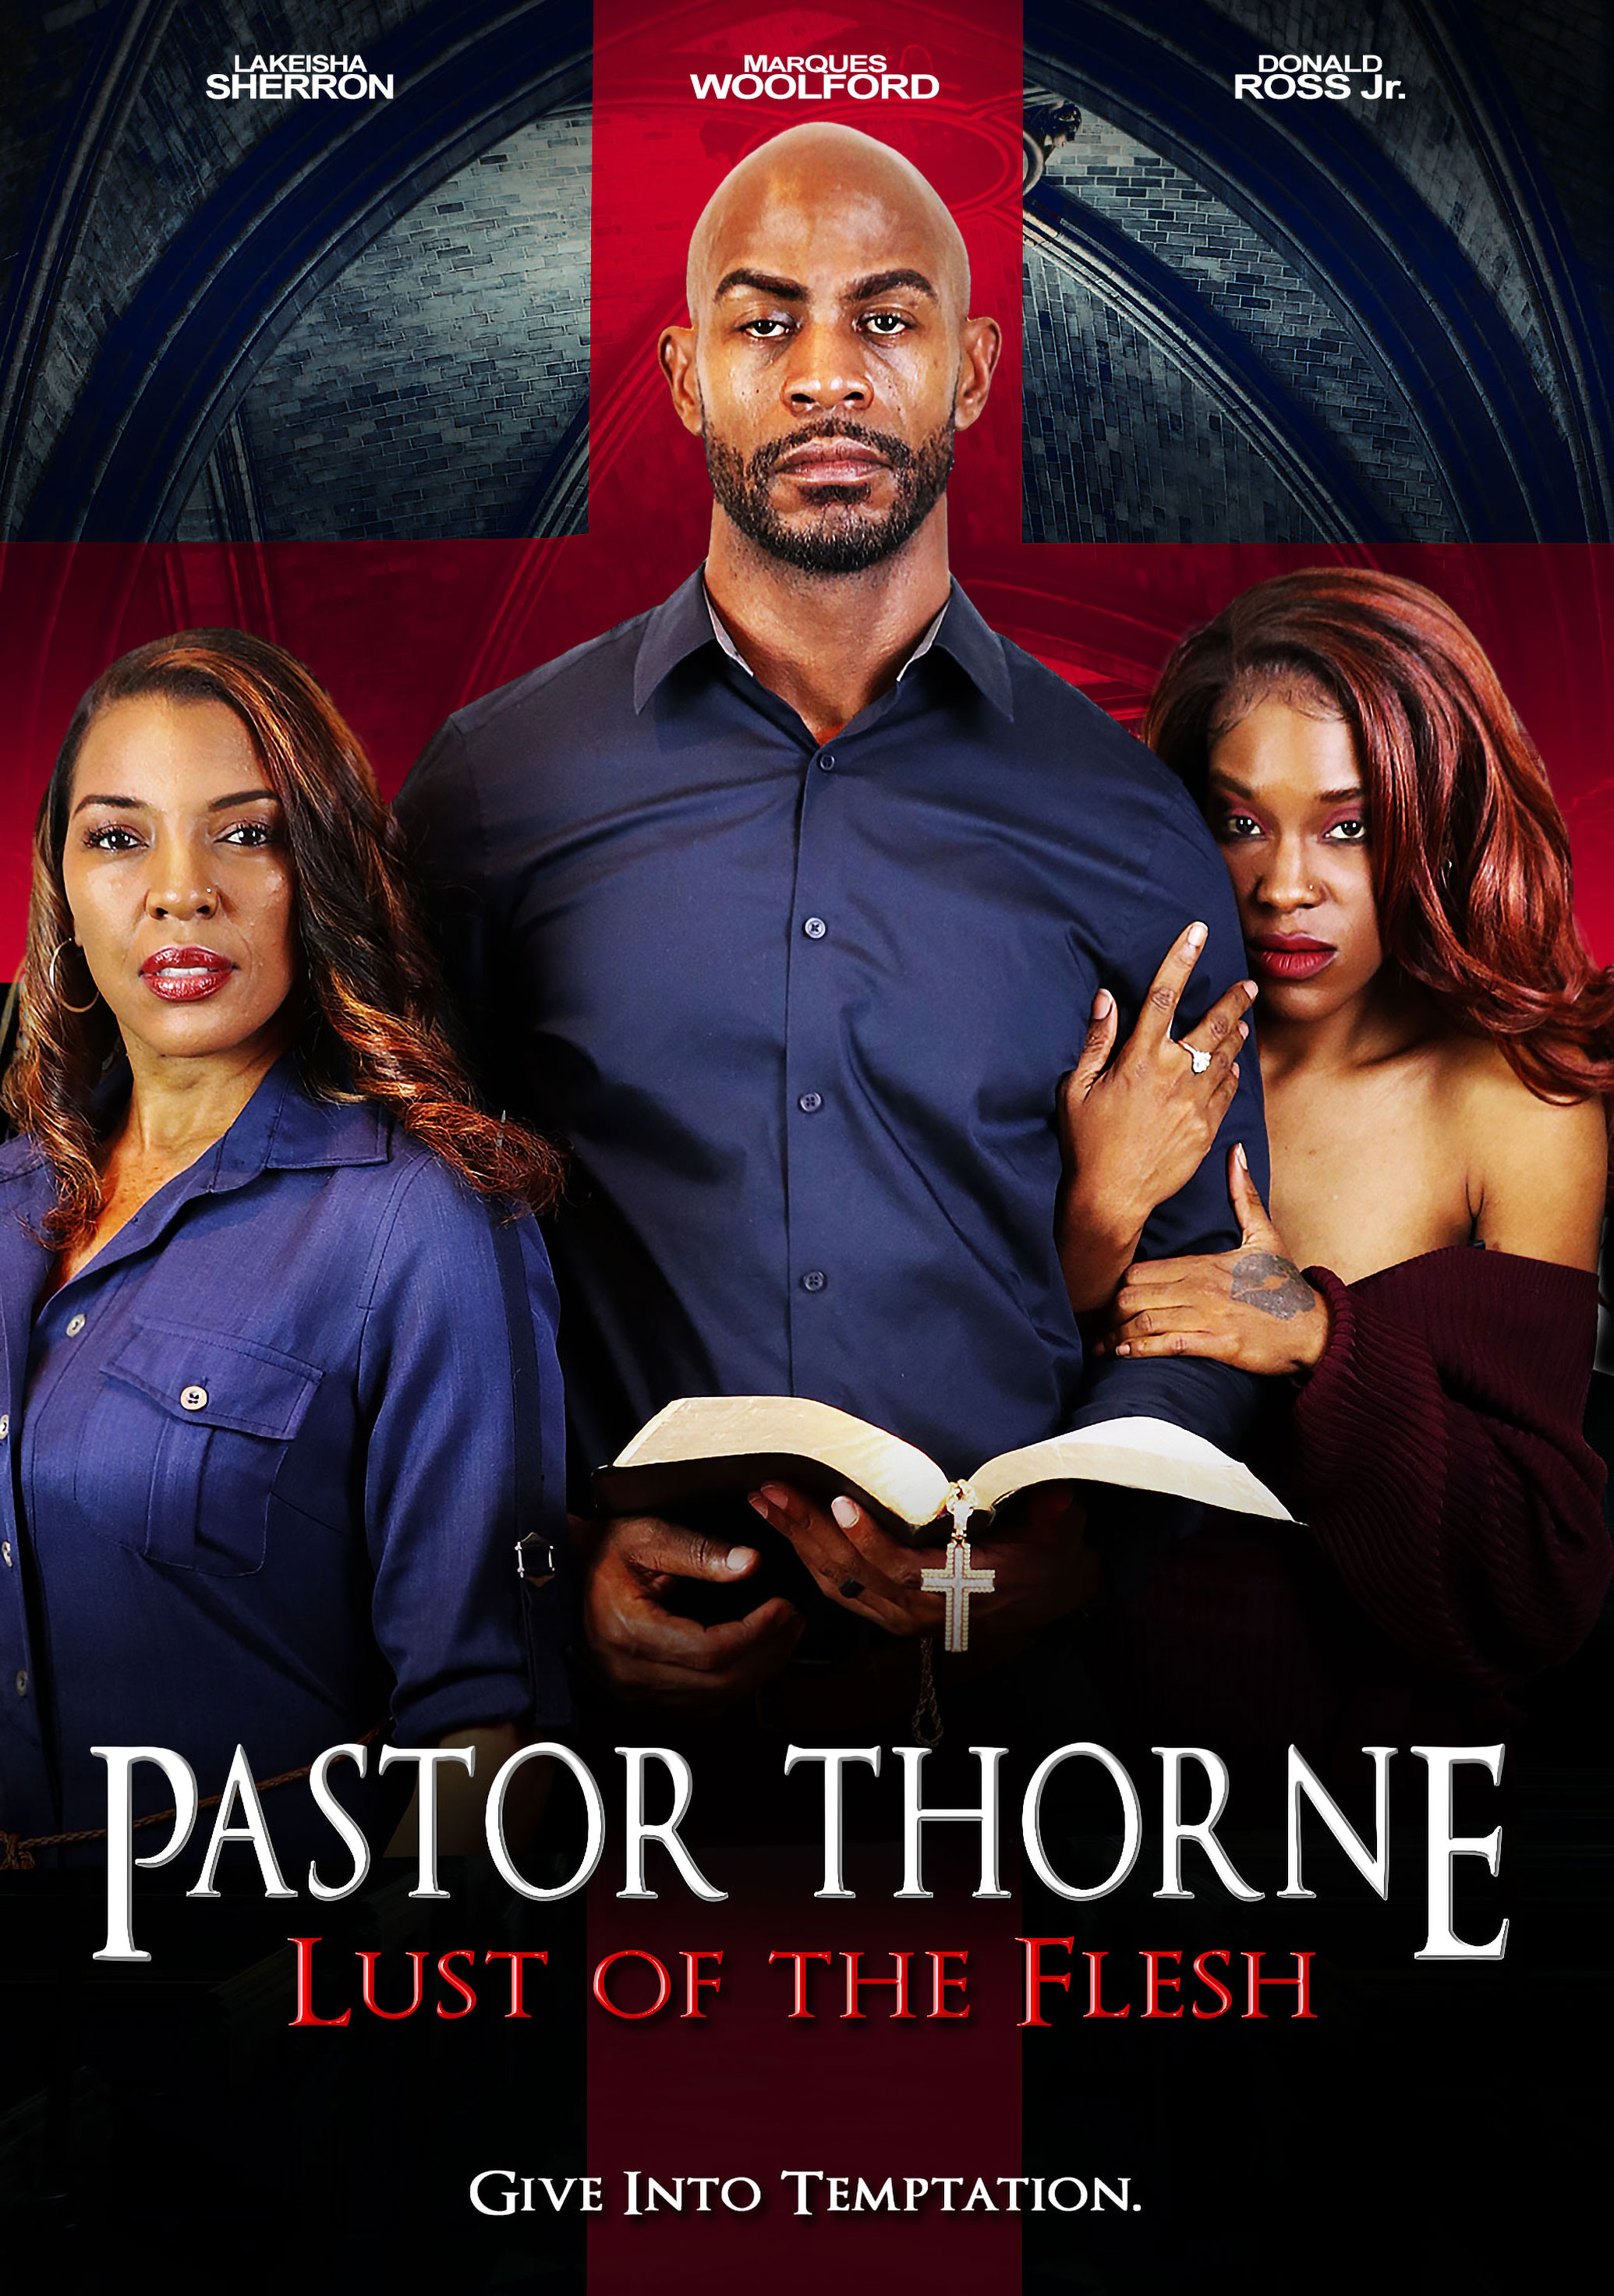 Pastor Thorne Lust of the Flesh (2021) Drama, Directed By Karlton T pic